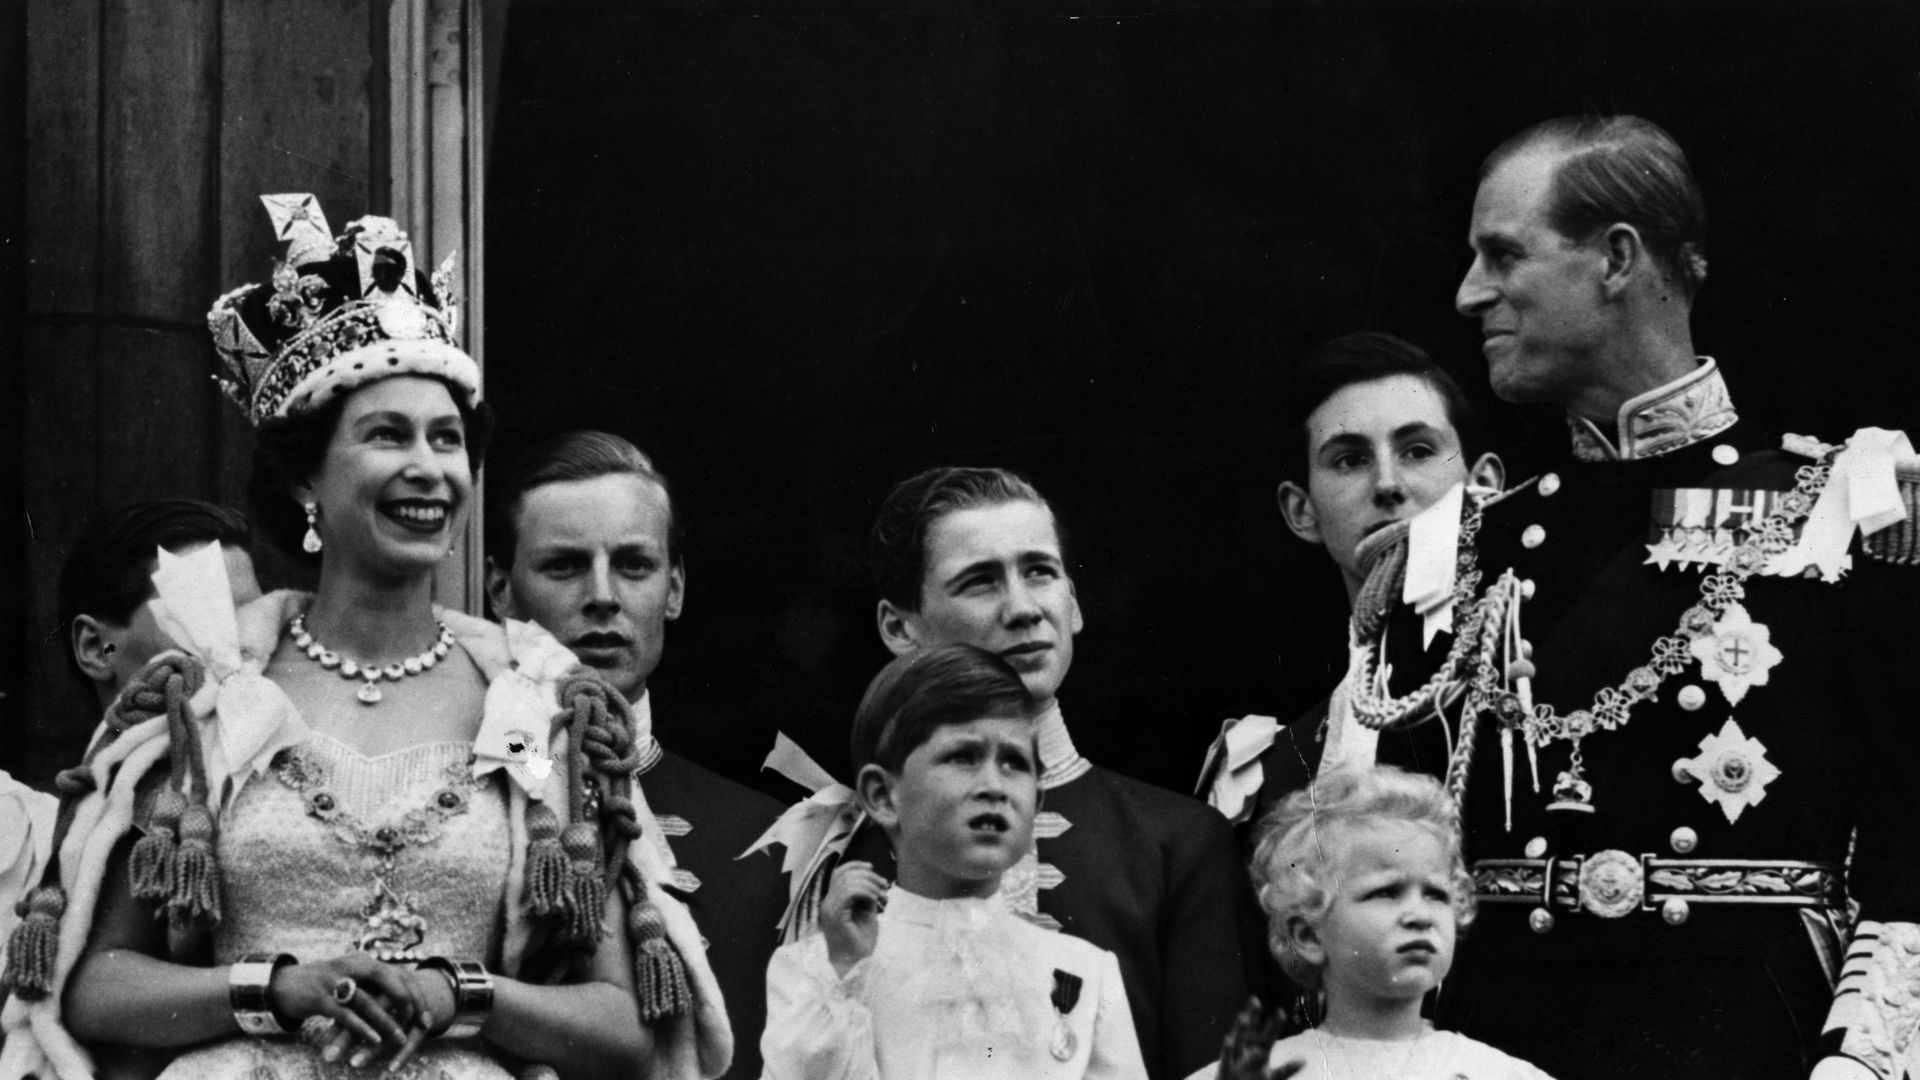 The Queen with King Charles, Princess Anne and Prince Philip on her coronation day